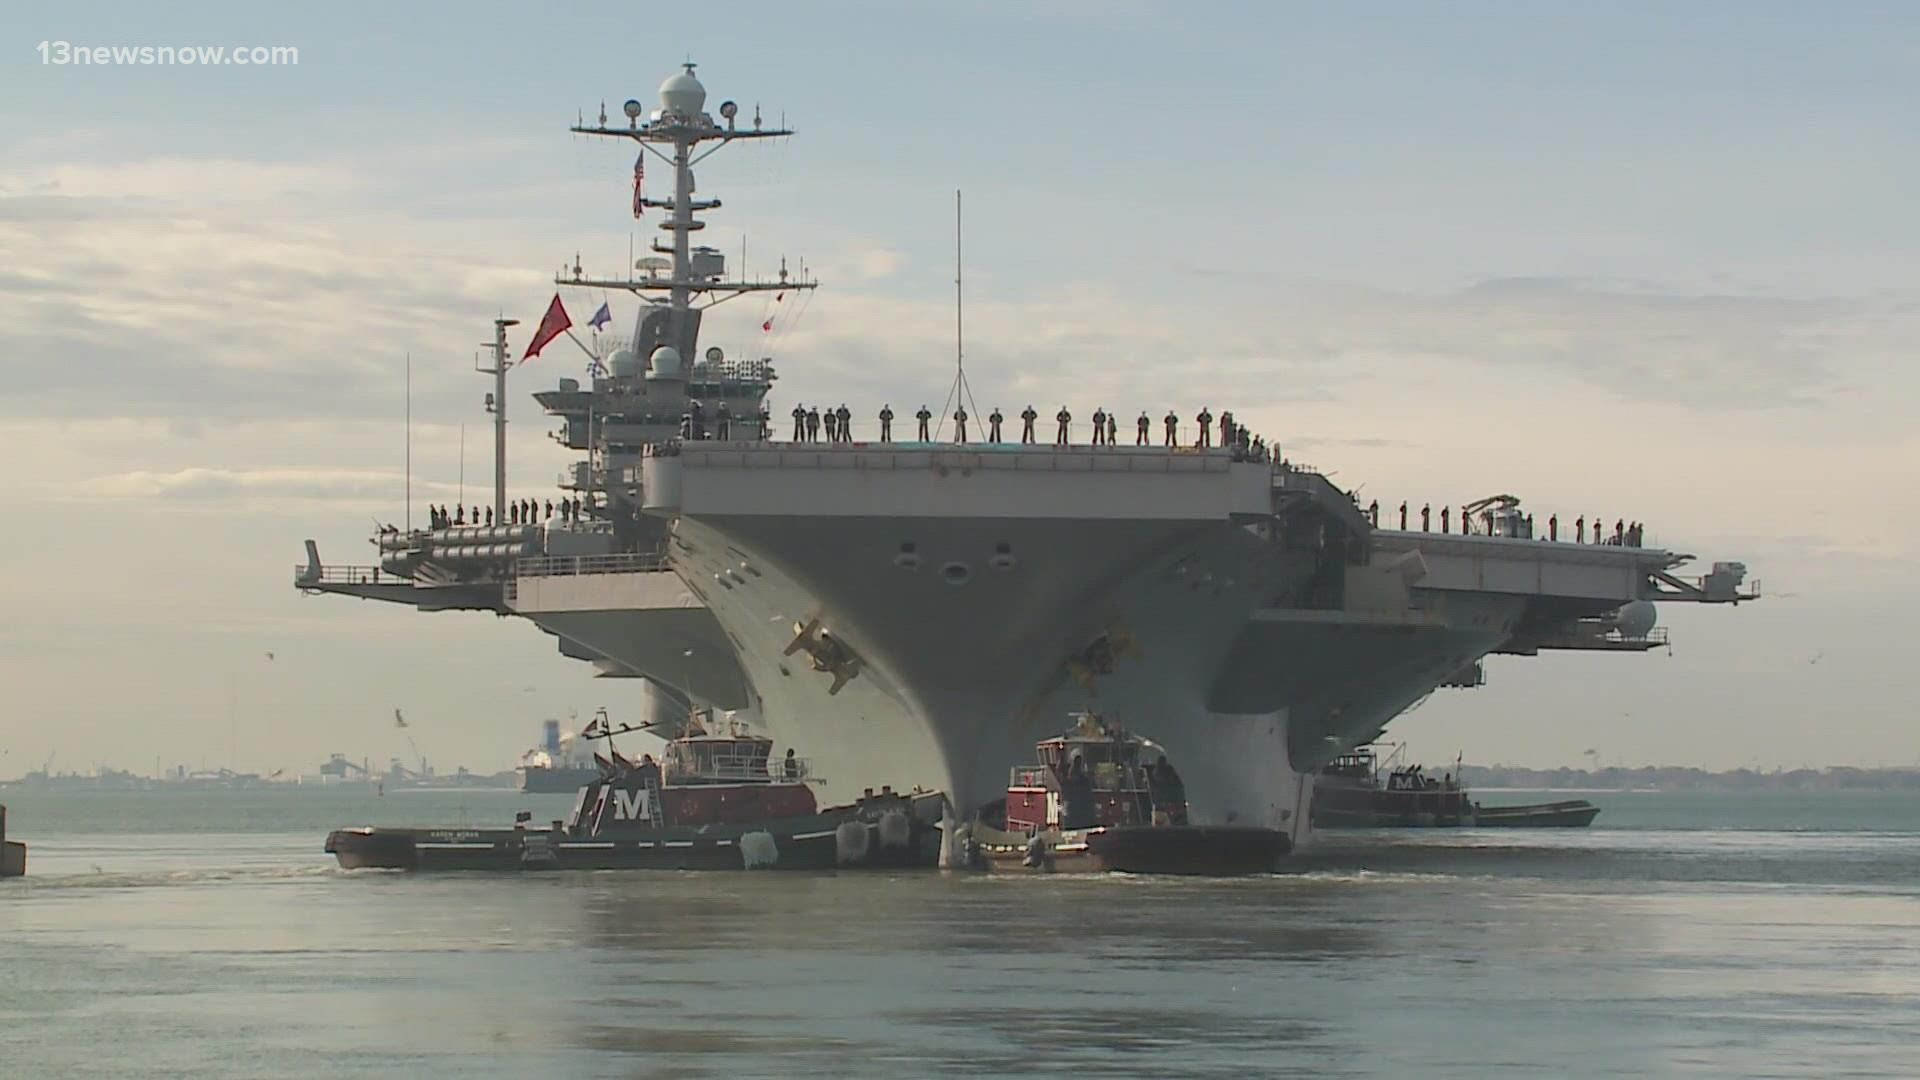 Just weeks ahead of Christmas, 6,000 sailors of the USS Harry S Truman deployed and families had to say their goodbyes.